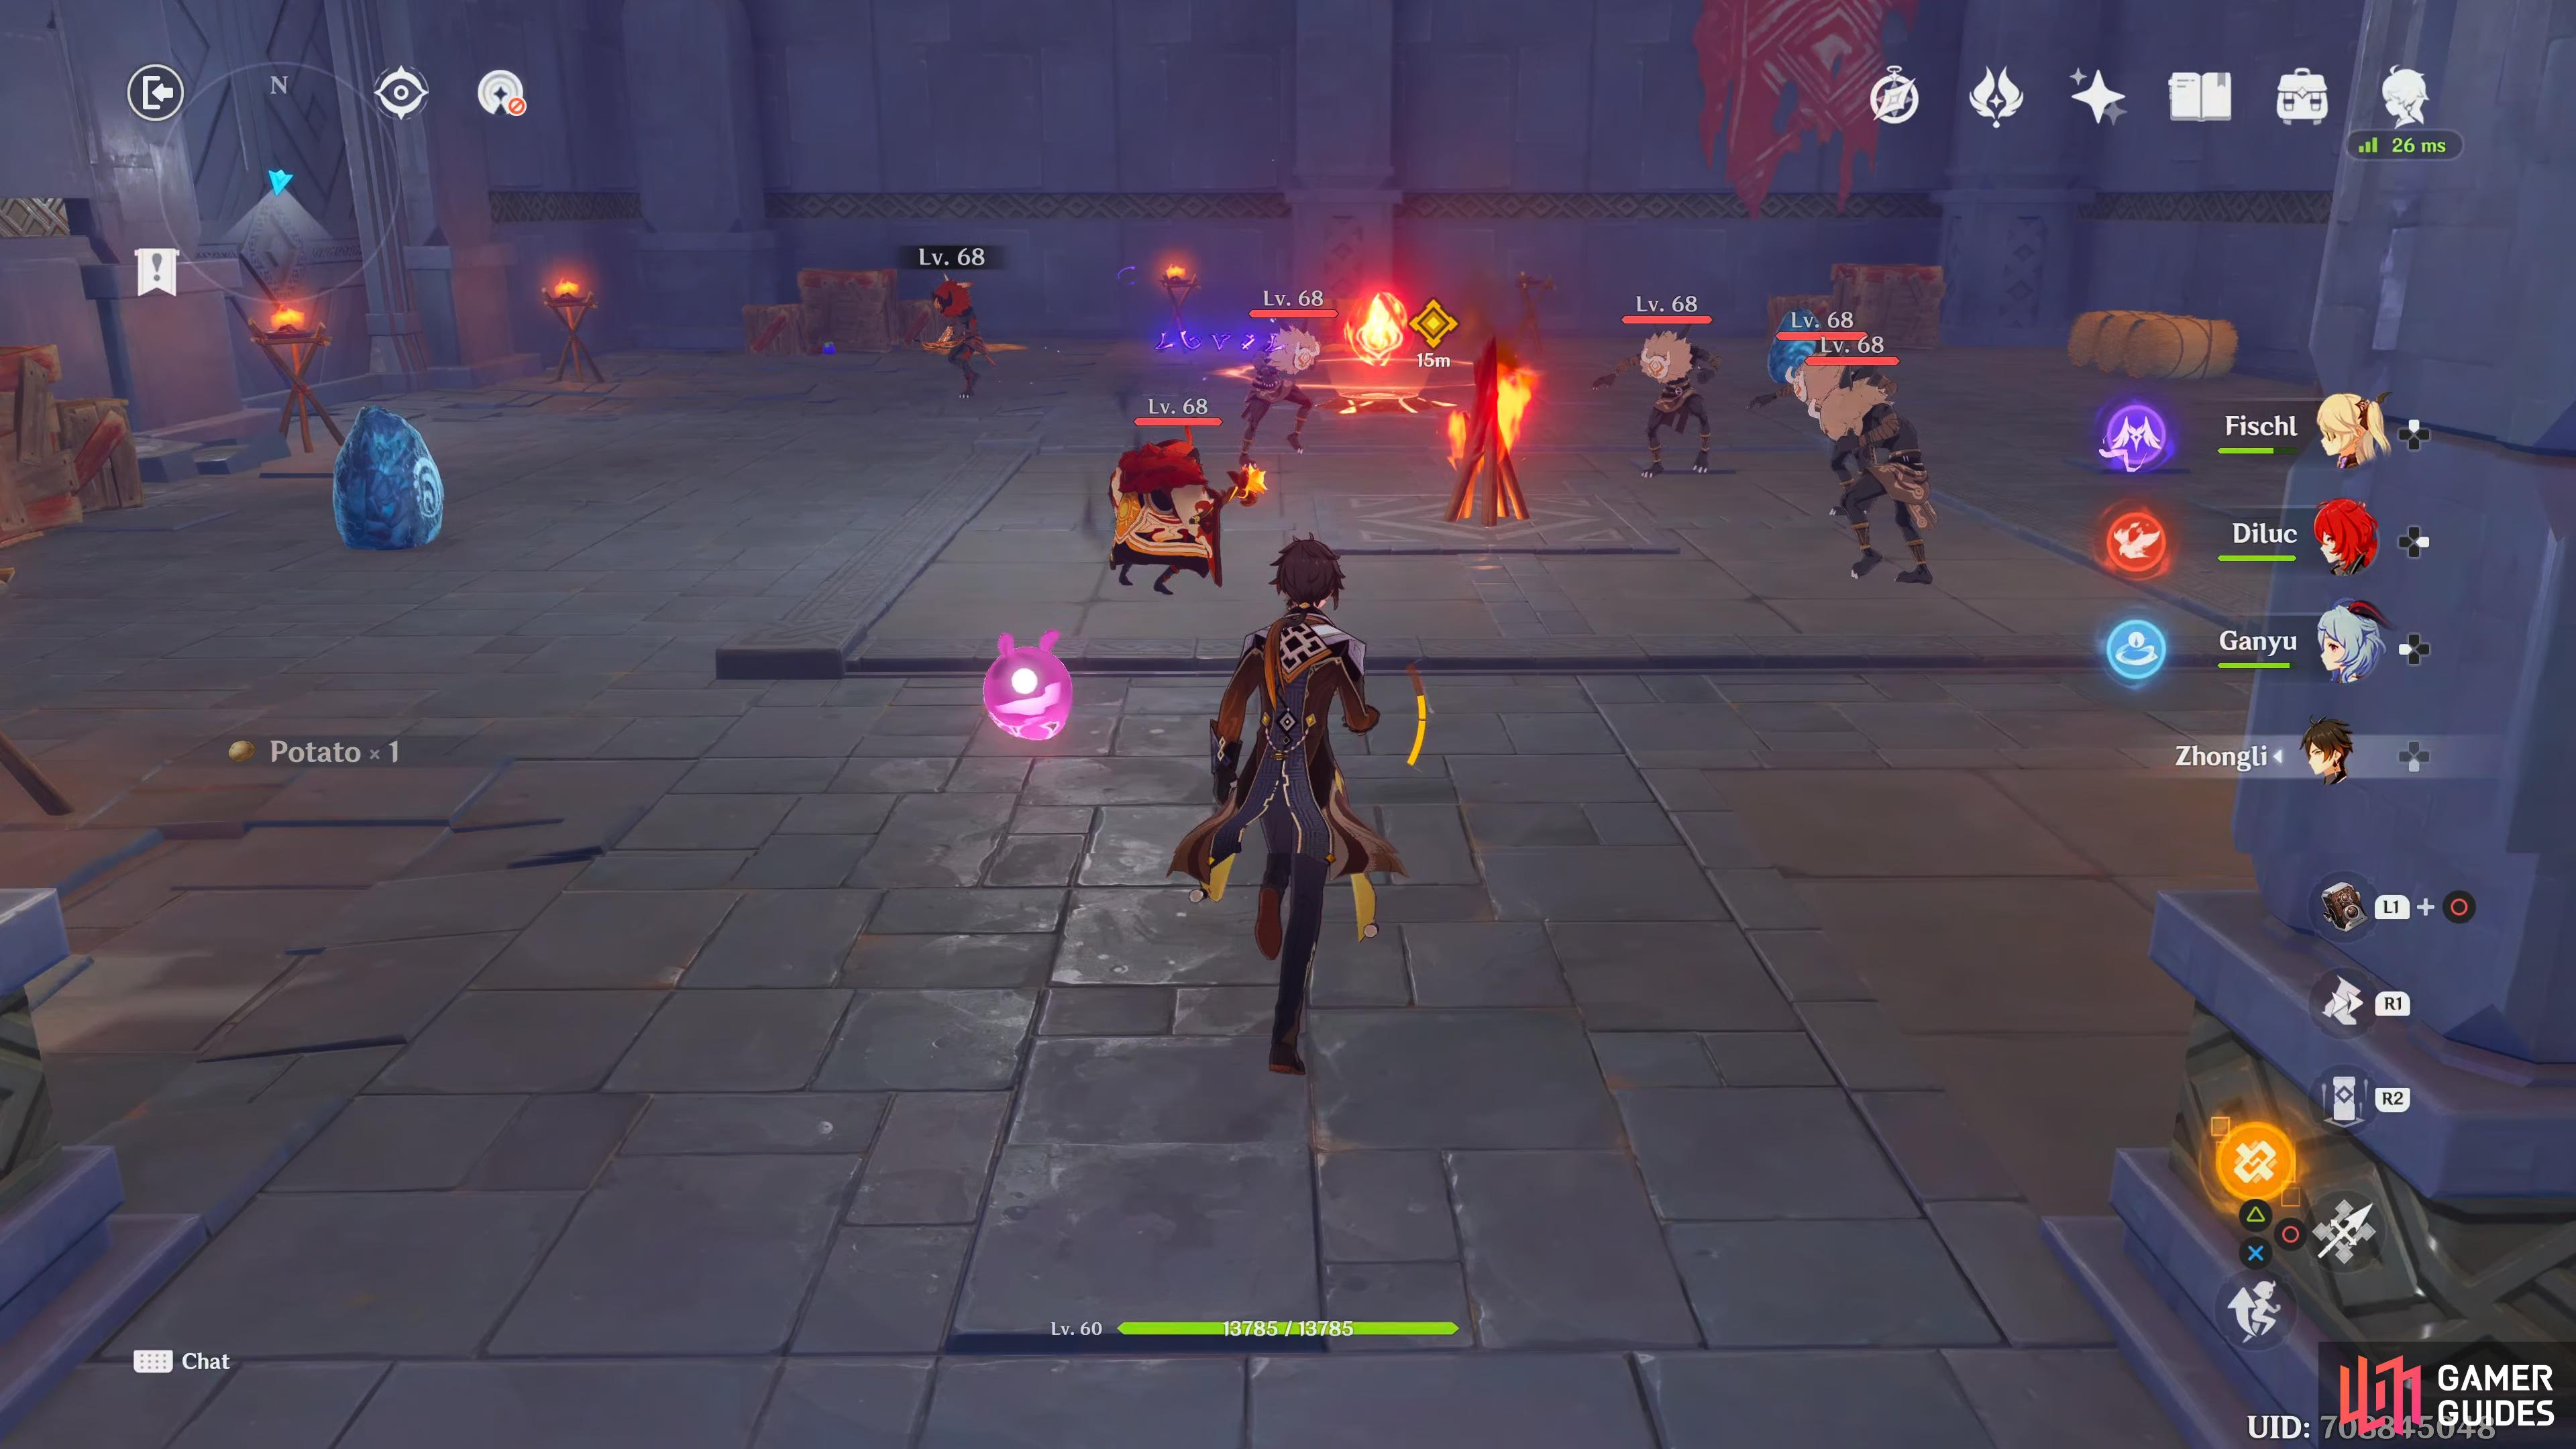 Attack the Hydro orbs around the arena to make the enemies wet.